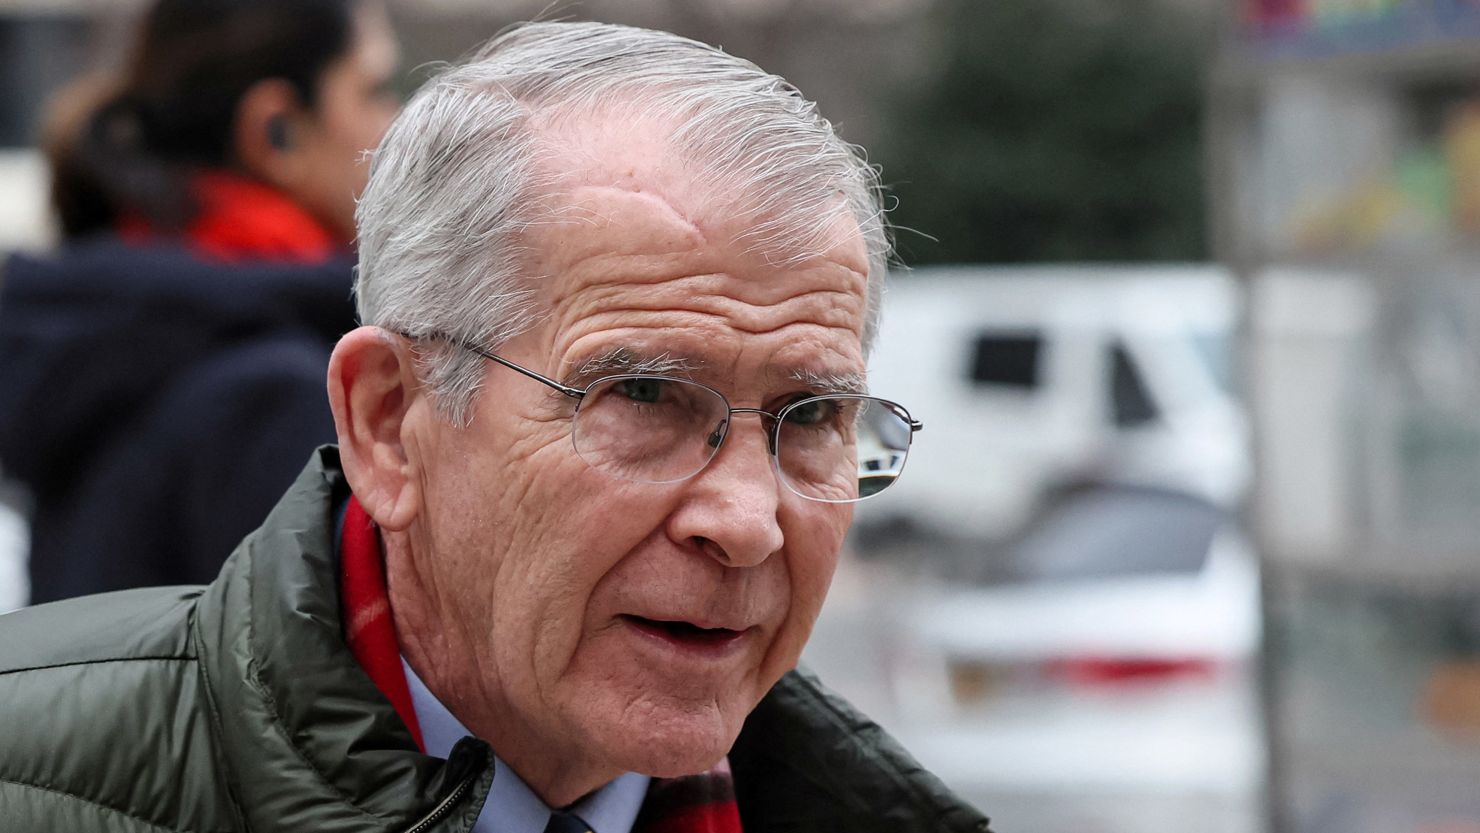 Oliver North Former NRA President says he was ousted after he raised